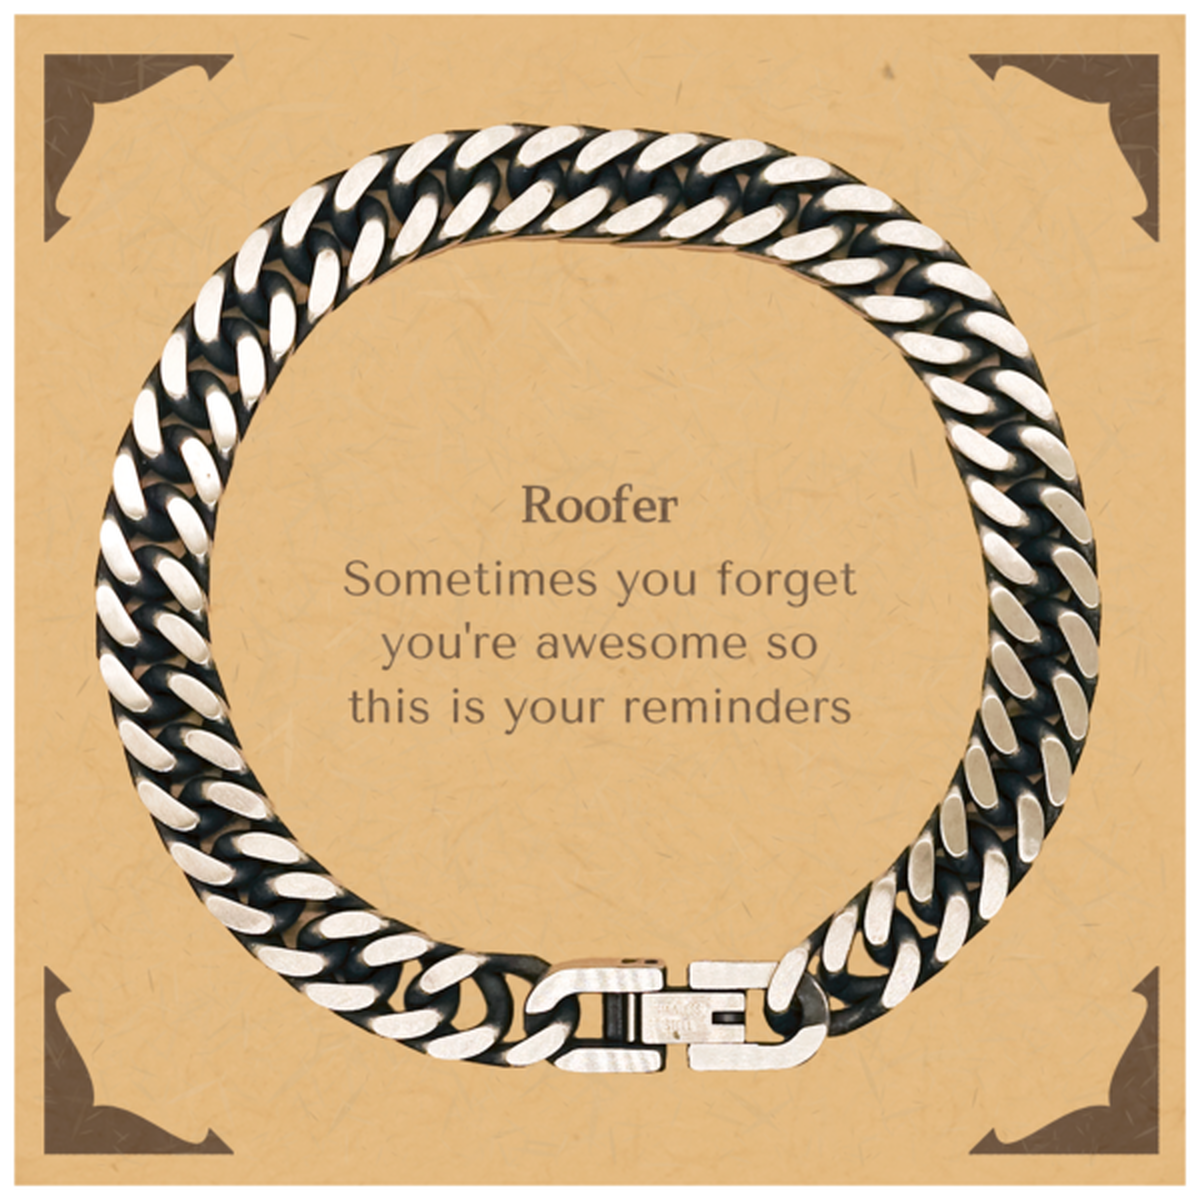 Sentimental Roofer Cuban Link Chain Bracelet, Roofer Sometimes you forget you're awesome so this is your reminders, Graduation Christmas Birthday Gifts for Roofer, Men, Women, Coworkers